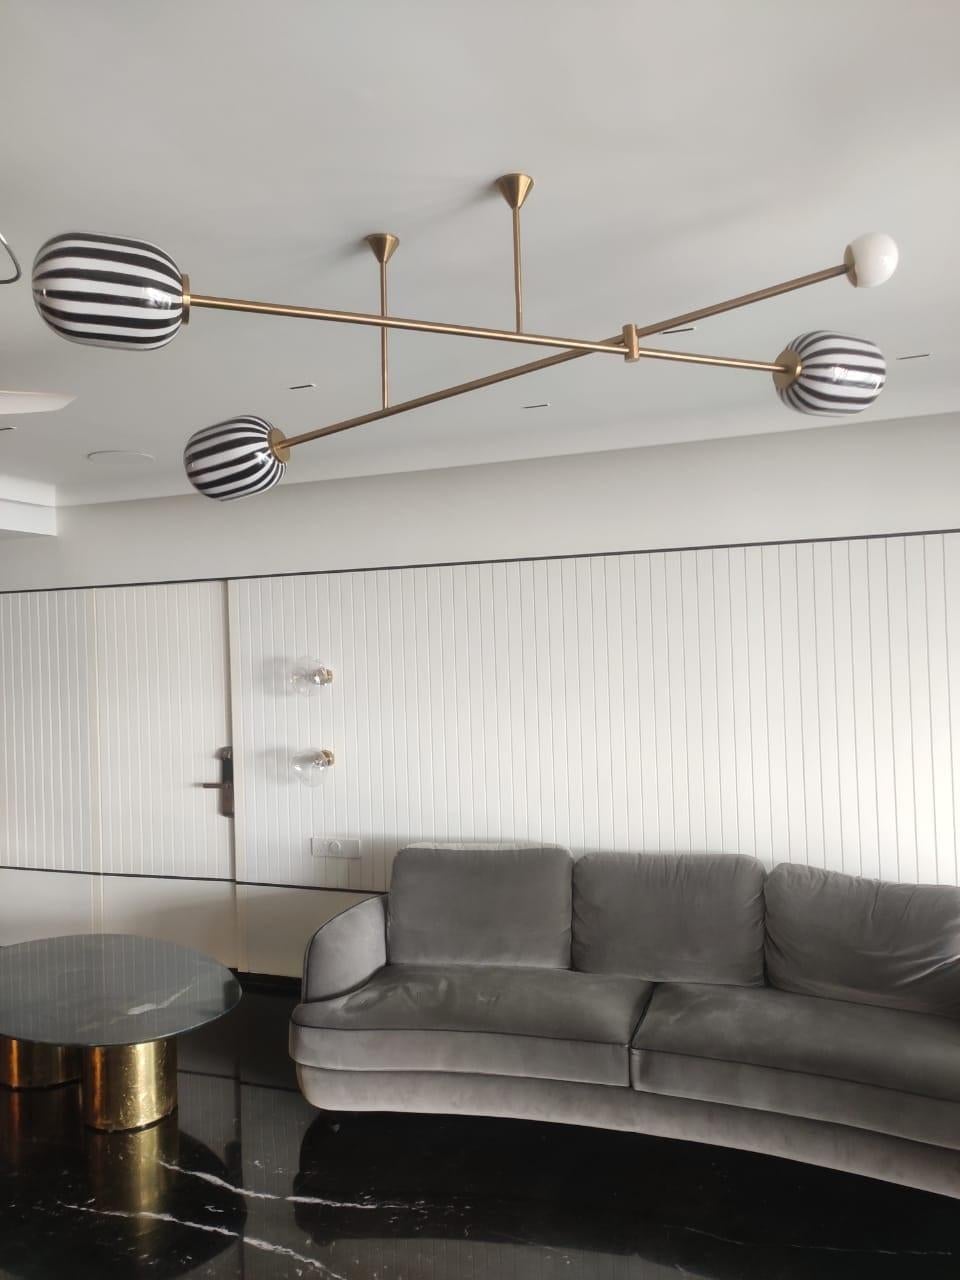 A captivating blend of whimsy and sophistication, this unique fixture combines handblown glass elements with Brass finishes to create a stunning visual centerpiece. Crafted with precision and care, the Bullseye Light features playful candy-inspired